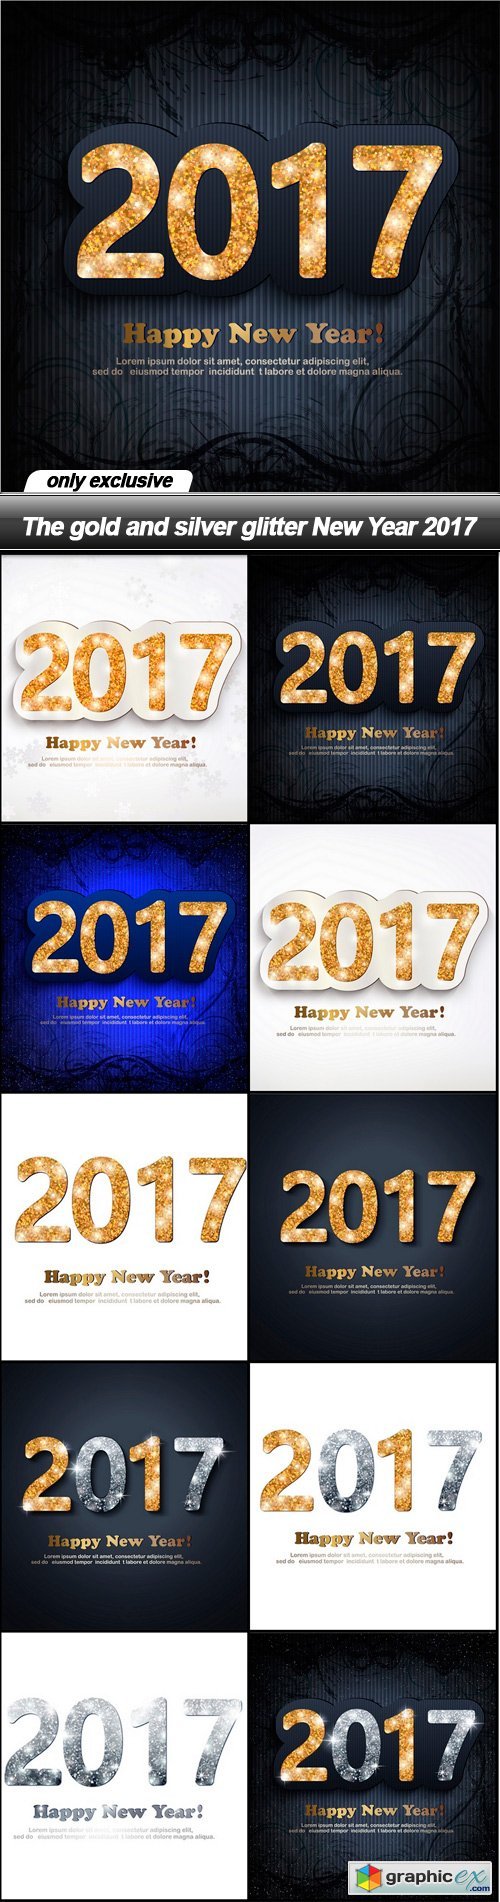 The gold and silver glitter New Year 2017 - 10 EPS